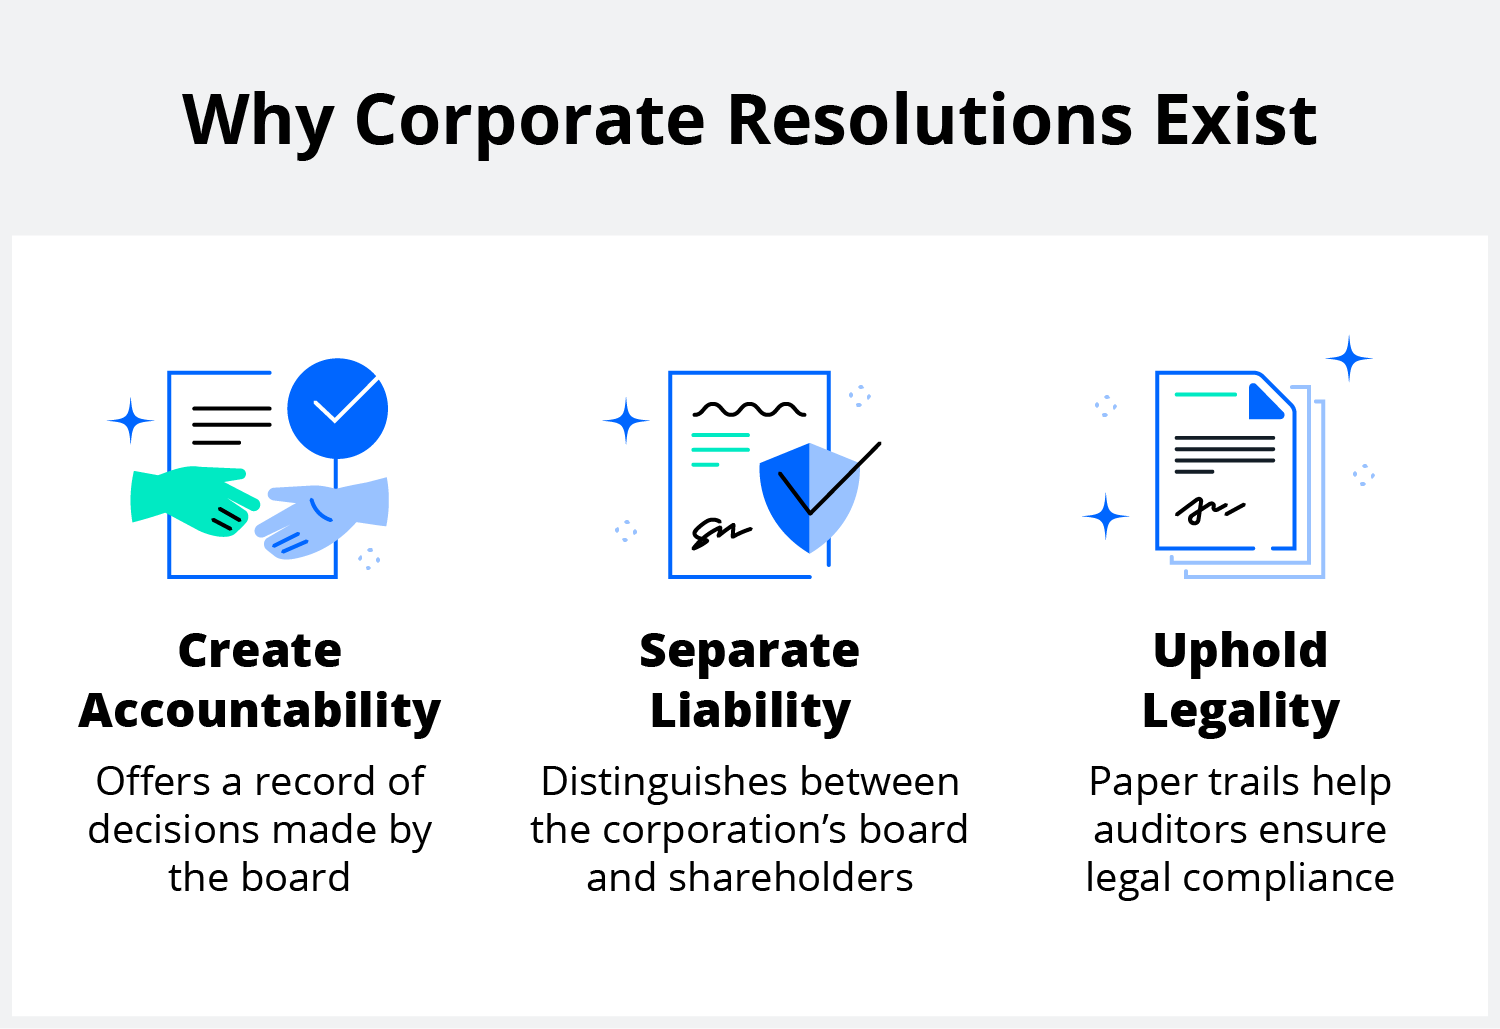 The three primary purposes of a corporate resolution is to foster accountability, separate liability, and uphold legality.